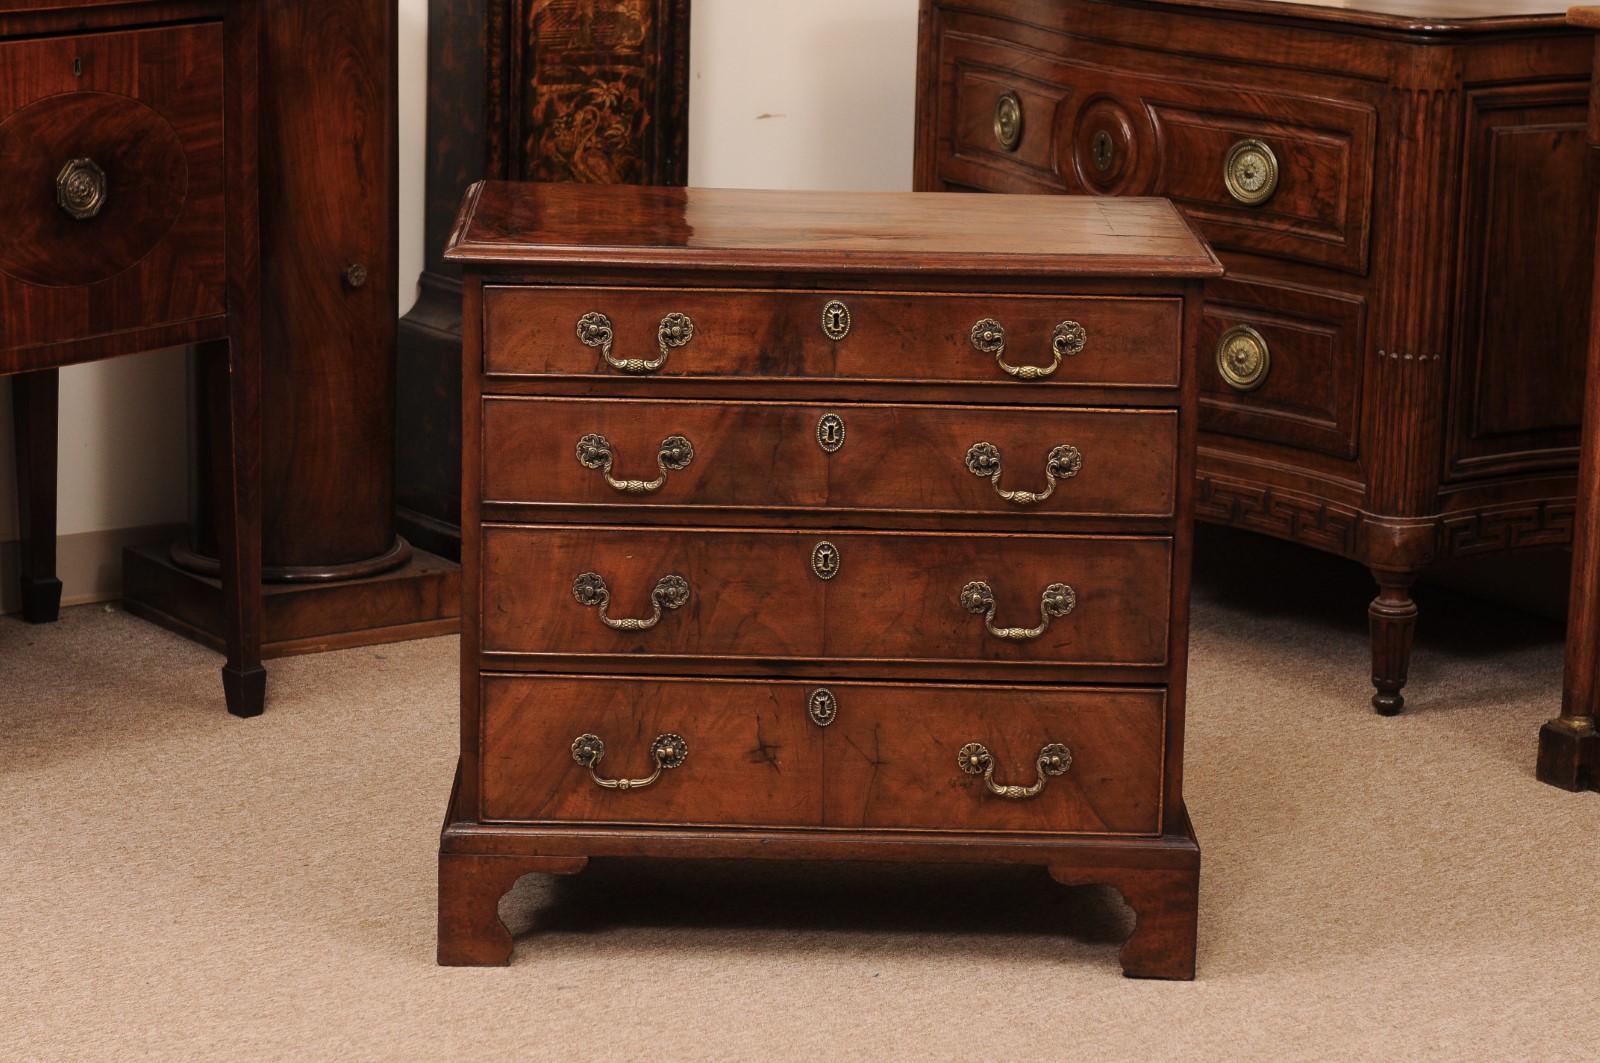 Small 18th Century English Mahogany Bachelor’s Chest with 4 Drawers and Bracket For Sale 8